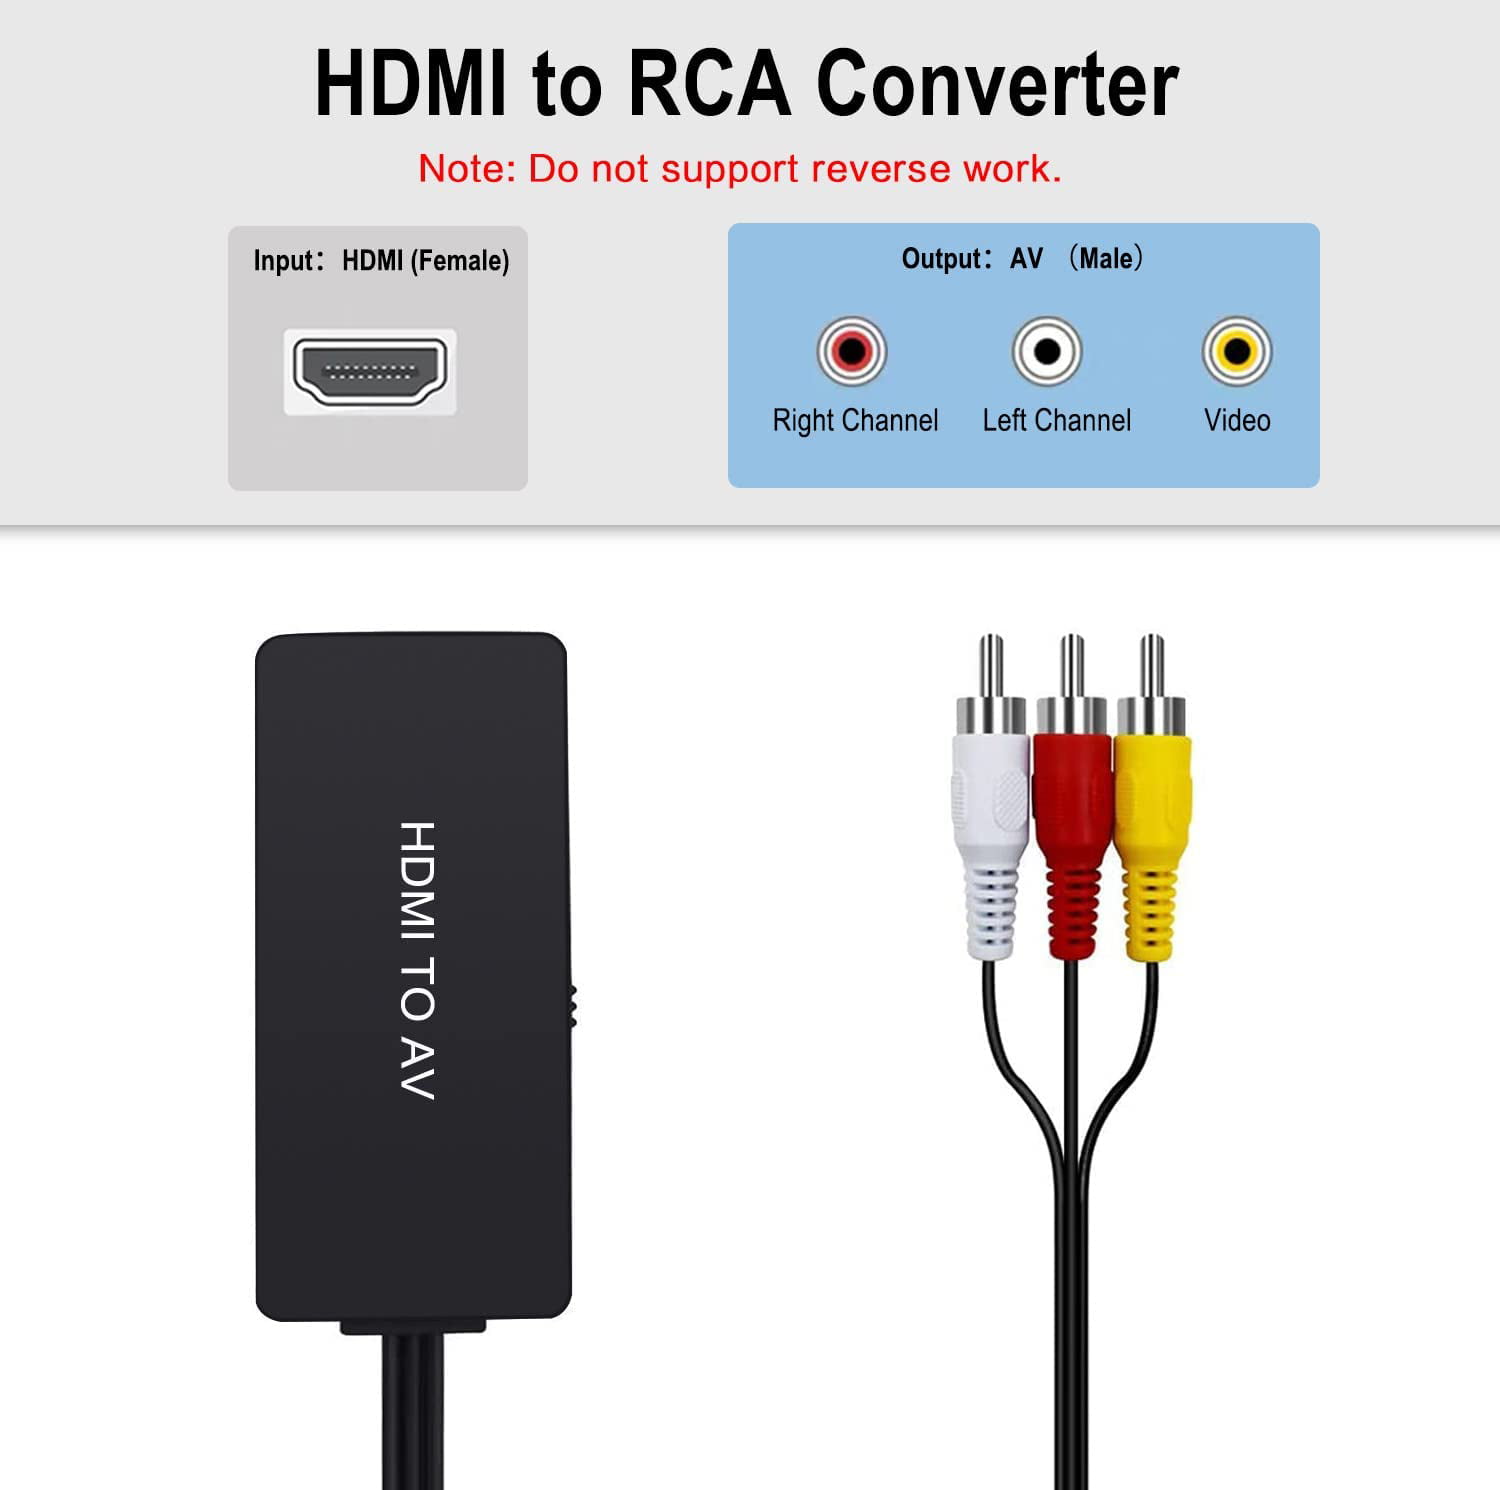 HDMI to RCA Converter for Old TV, HDMI to AV Adapter, HDMI to Composite Converter Appler TV/Roku/Chromecast/PC/Laptop/Xbox/STB/VHS/VCR/DVD/Blu-Ray Player/Android TV Box, ect. - Walmart.com